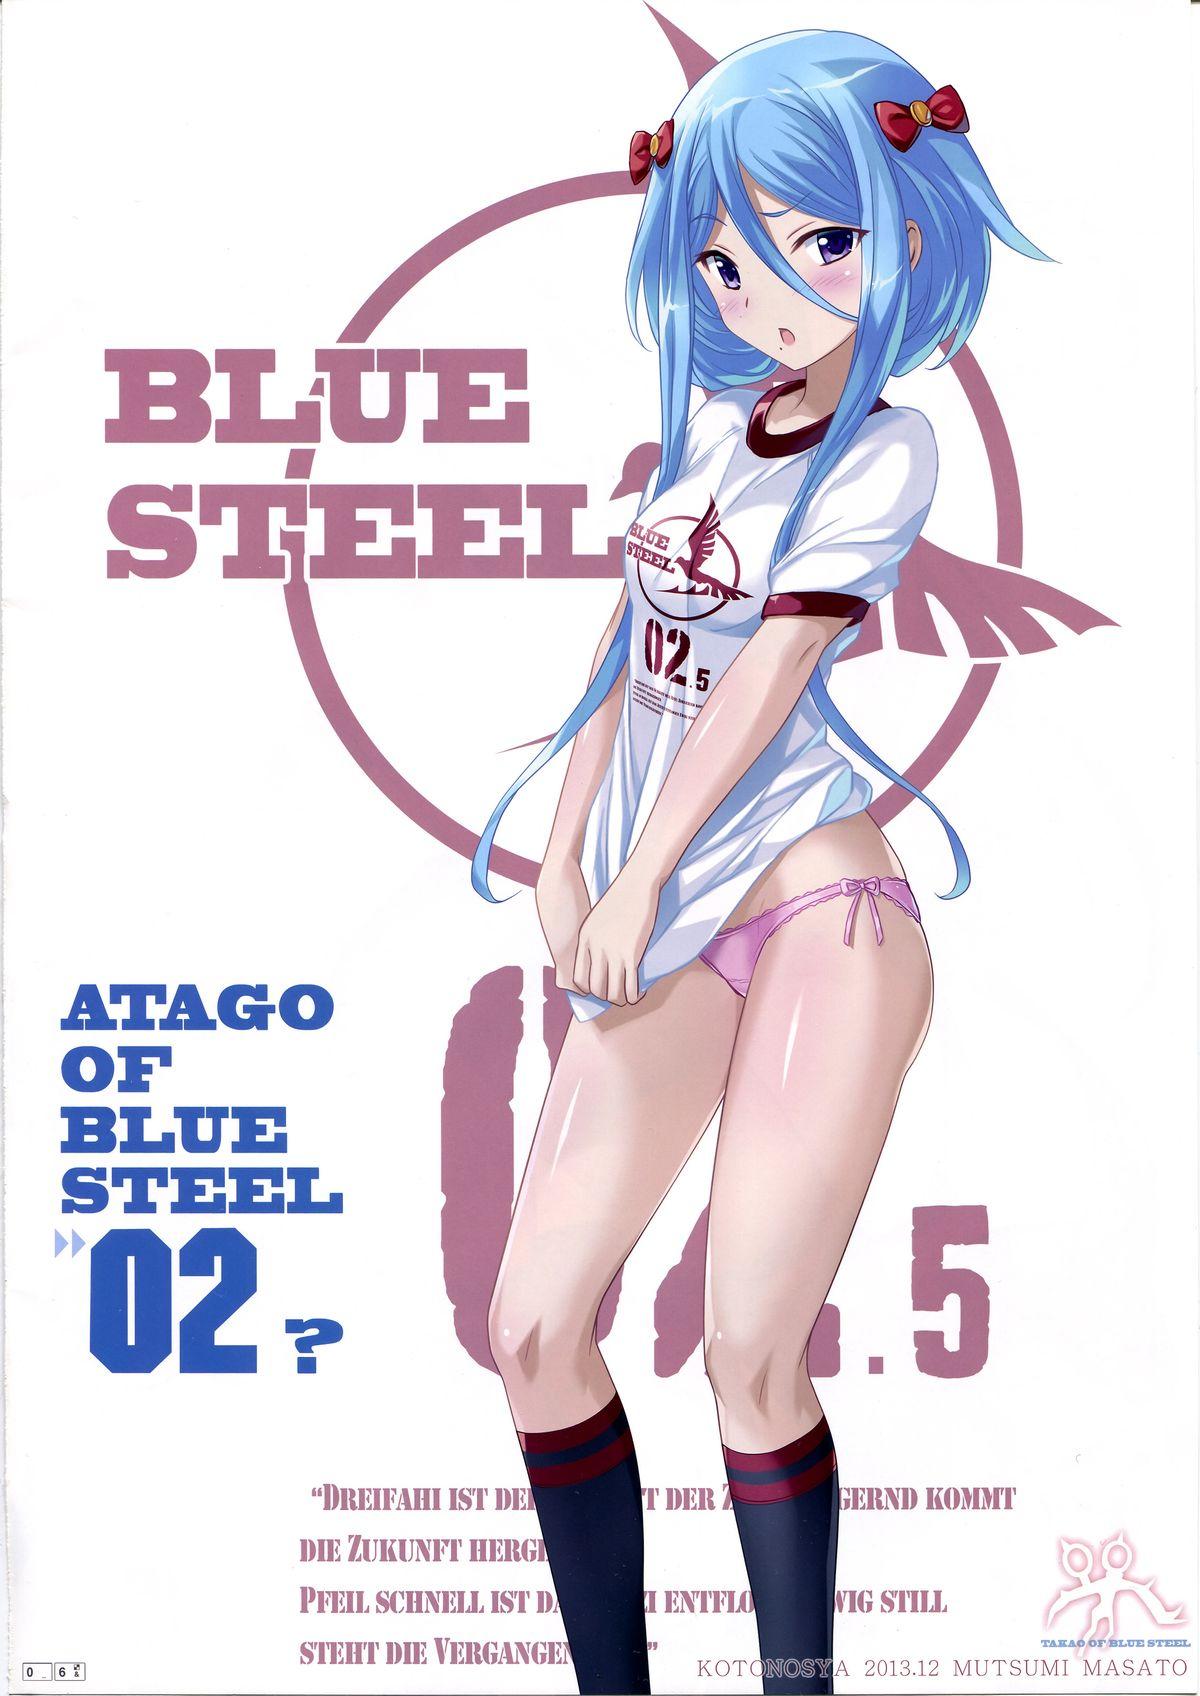 Peeing TAKAO OF BLUE STEEL 02 - Arpeggio of blue steel Lingerie - Page 5